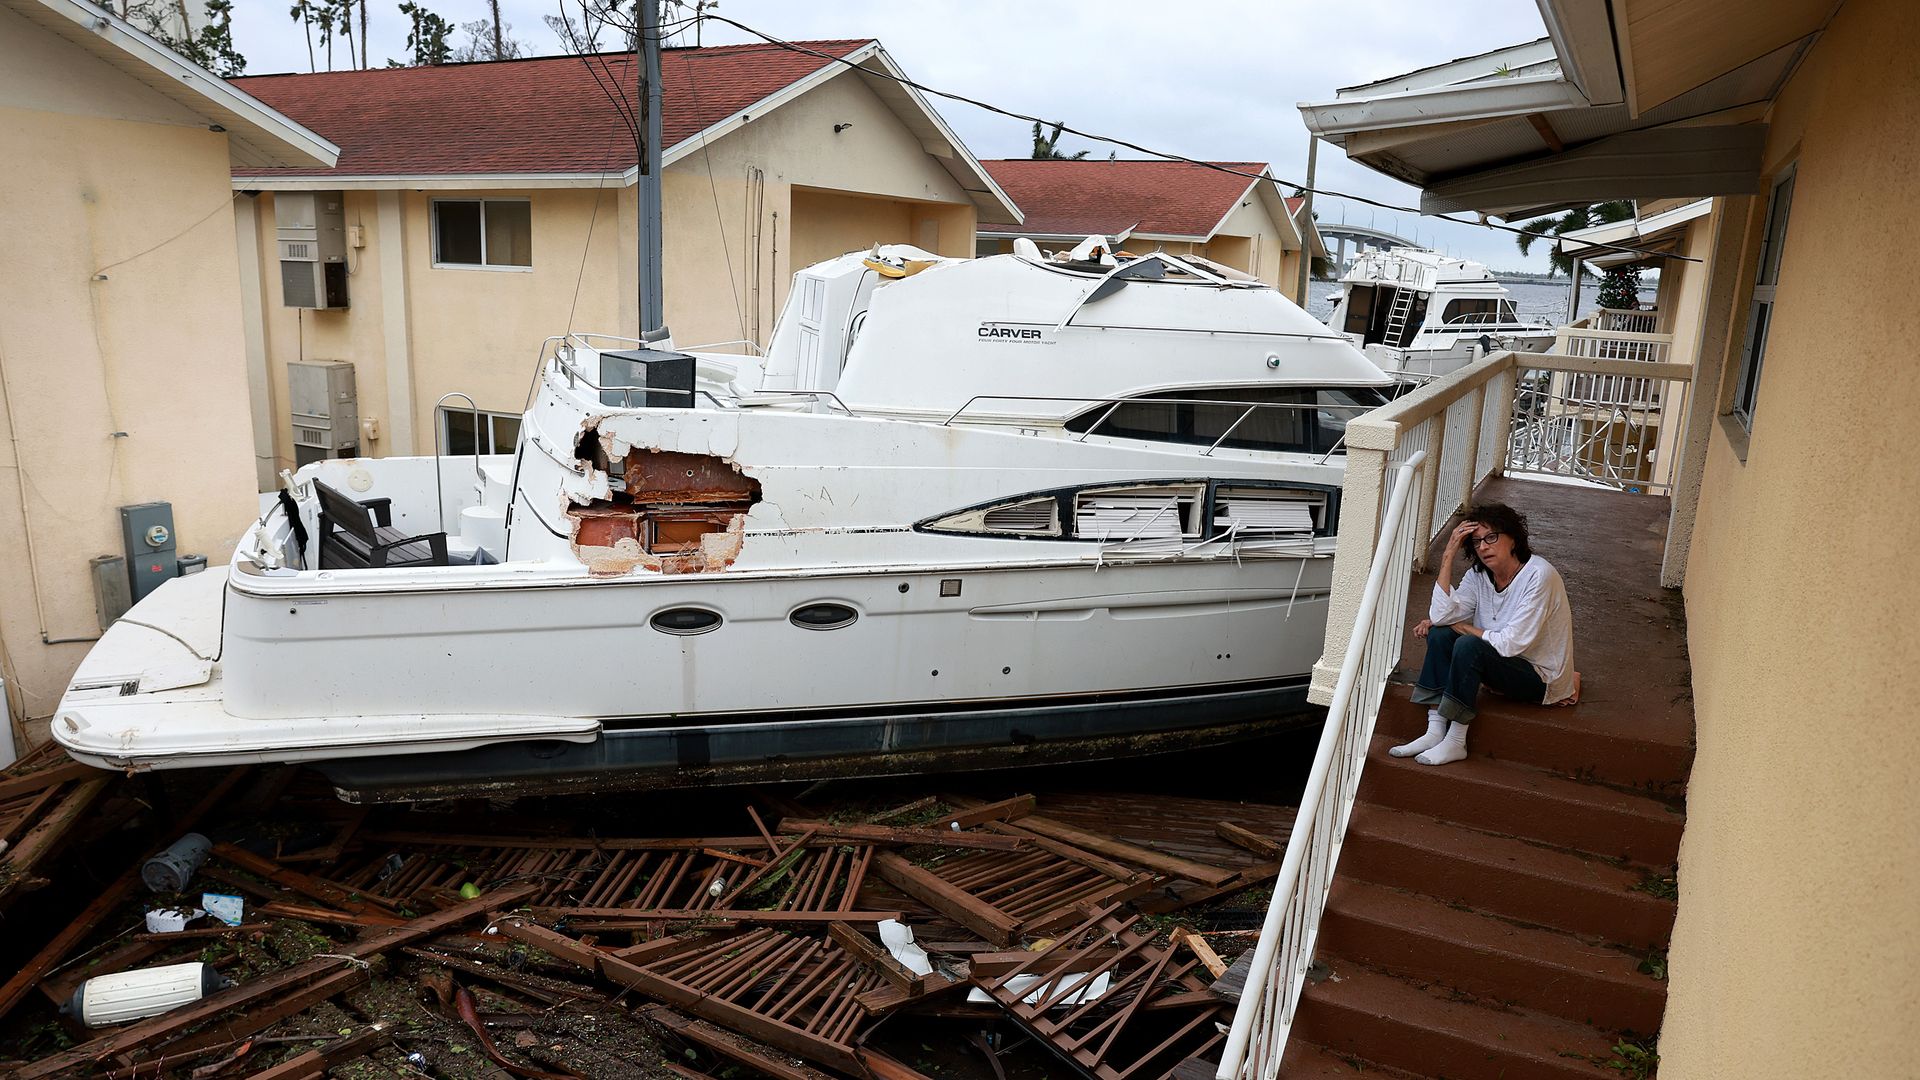 A person in Fort Myers, Florida, on Sept. 29 sitting next to a boat that crashes into a building apartment as Hurricane Ian tore through the area.